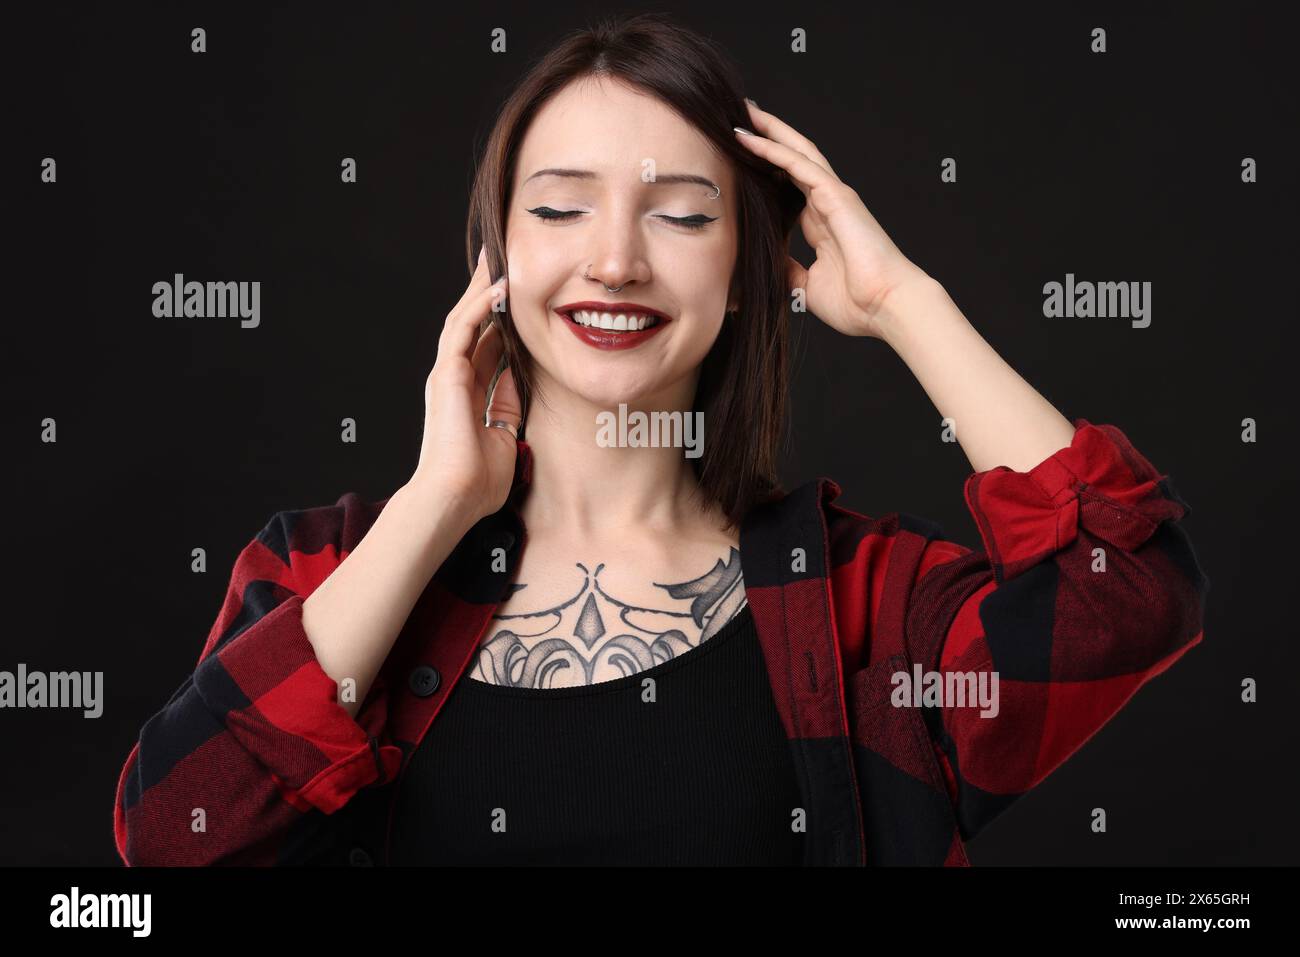 Portrait of smiling tattooed woman on black background Stock Photo